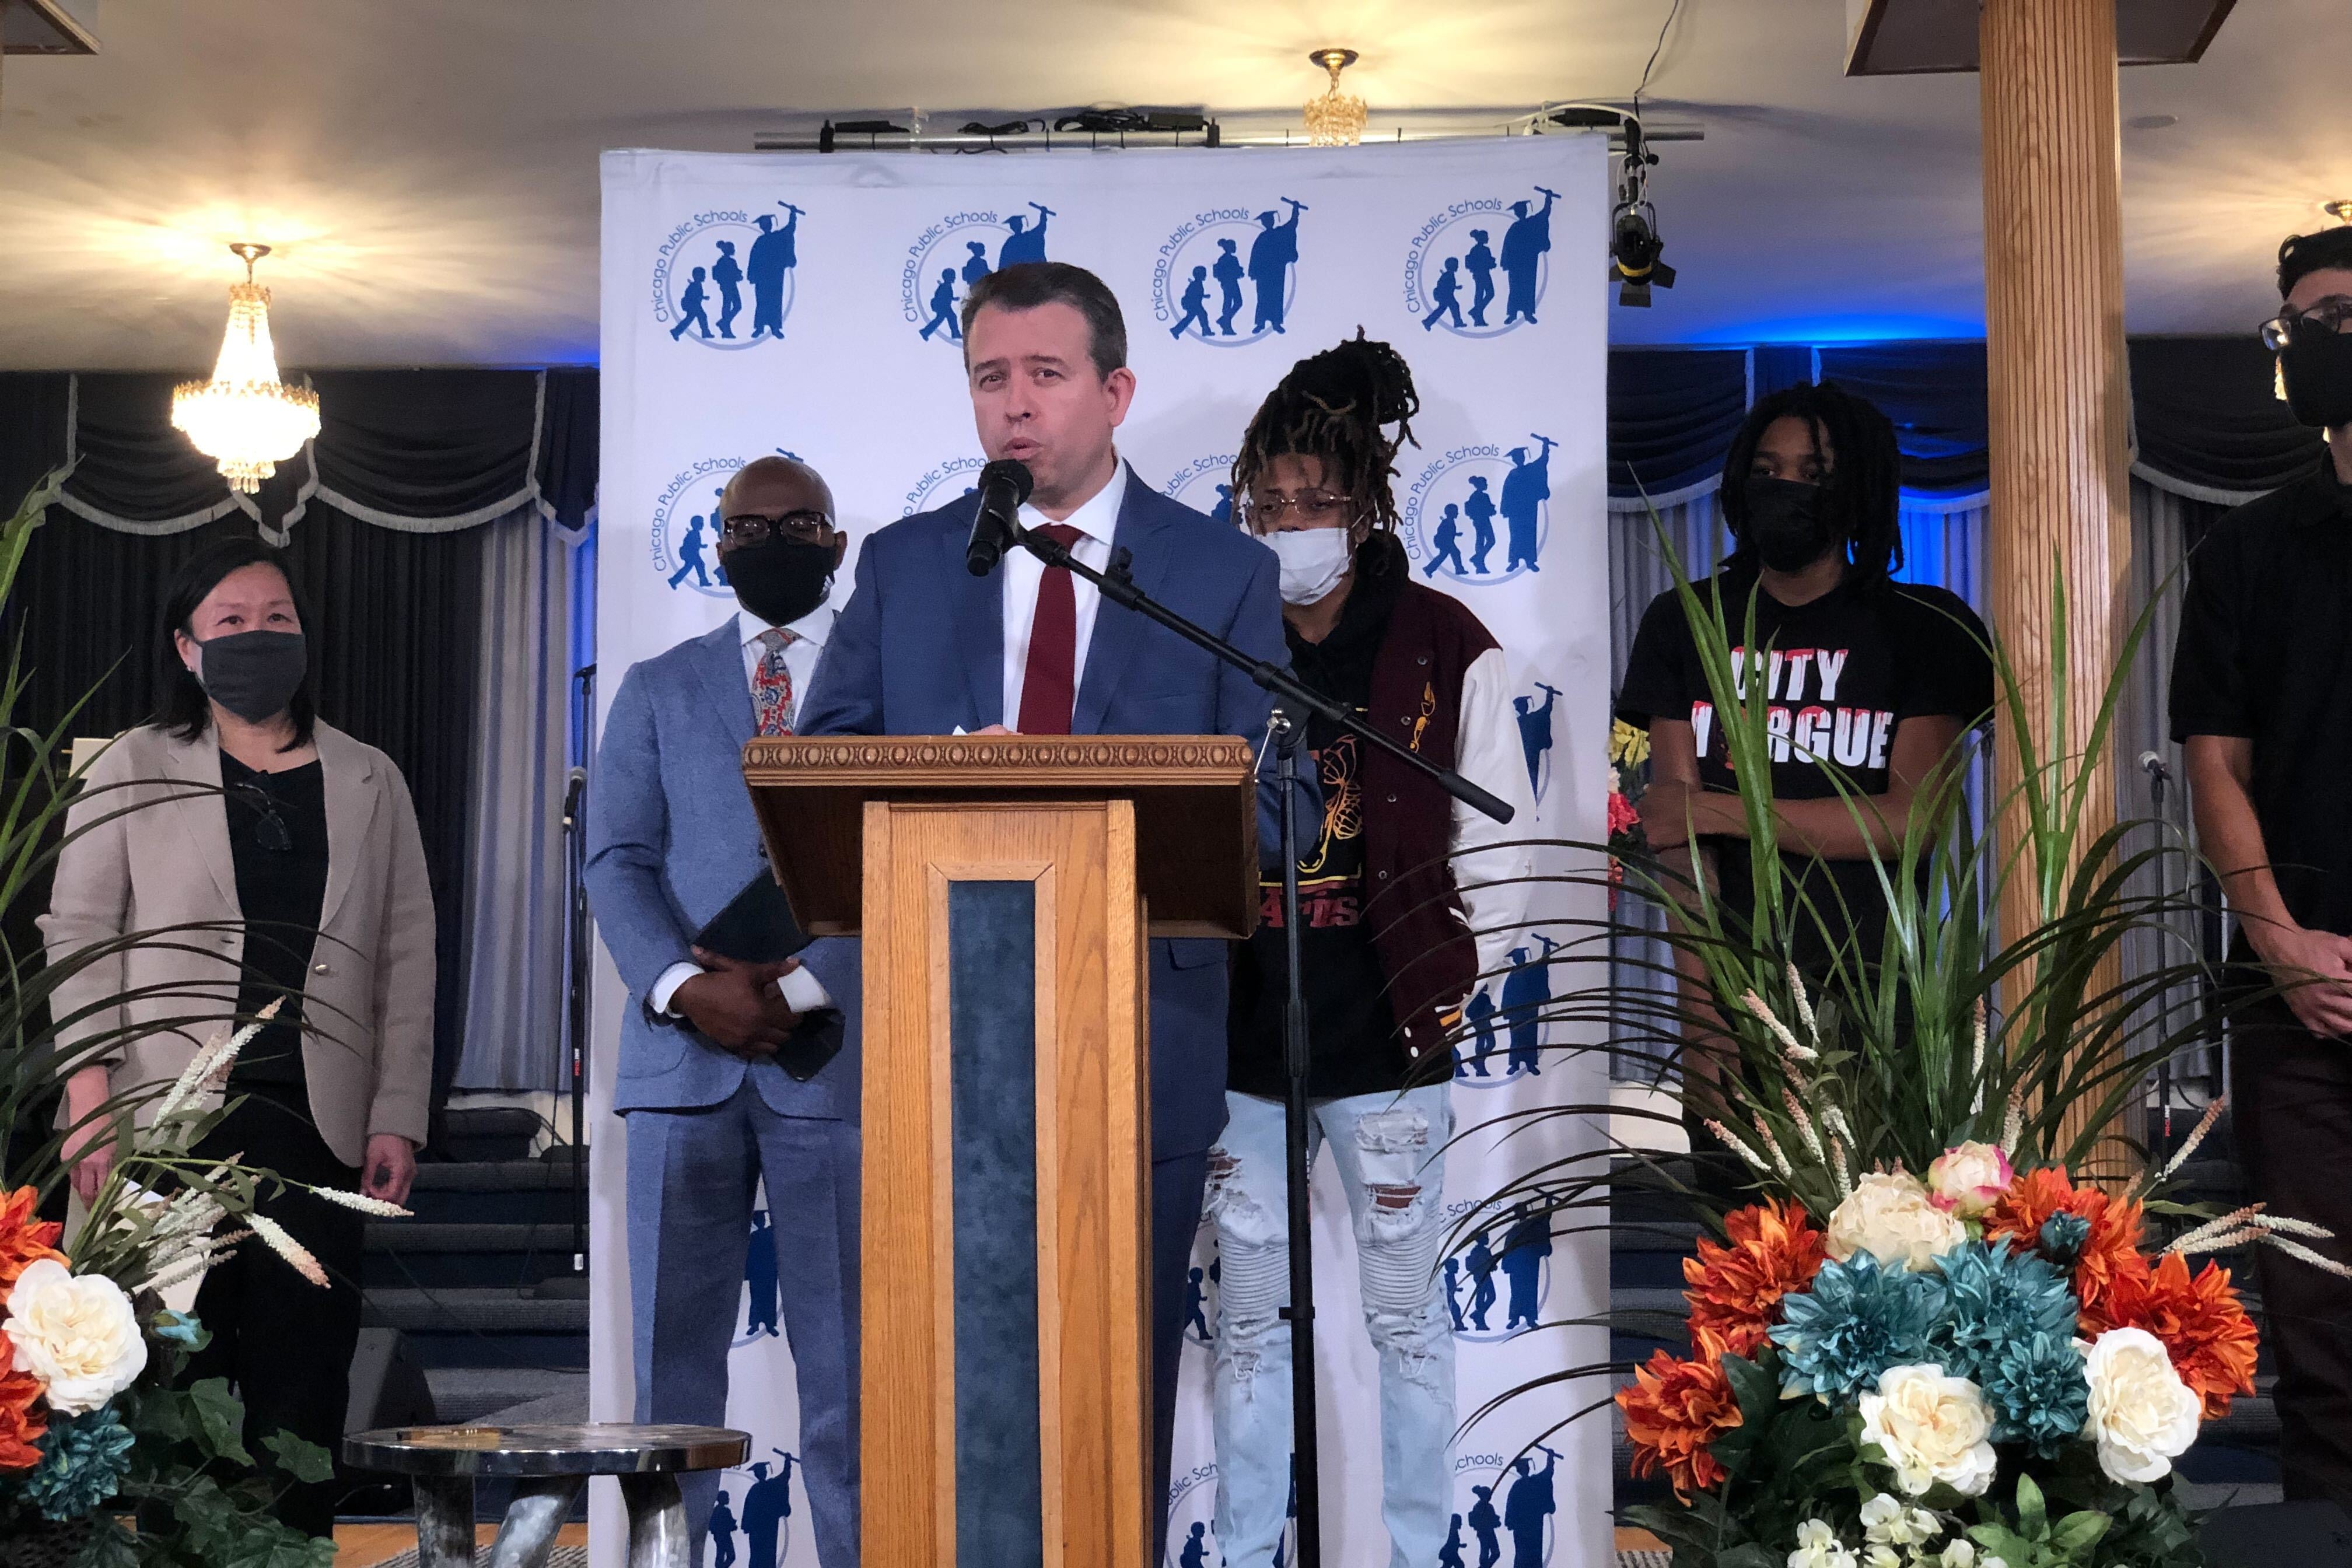 Flanked by district officials and local students, Chicago Public Schools CEO Pedro Martinez stands at a podium in a suit and tie and announces an expansion of a youth violence intervention program Choose for Change.